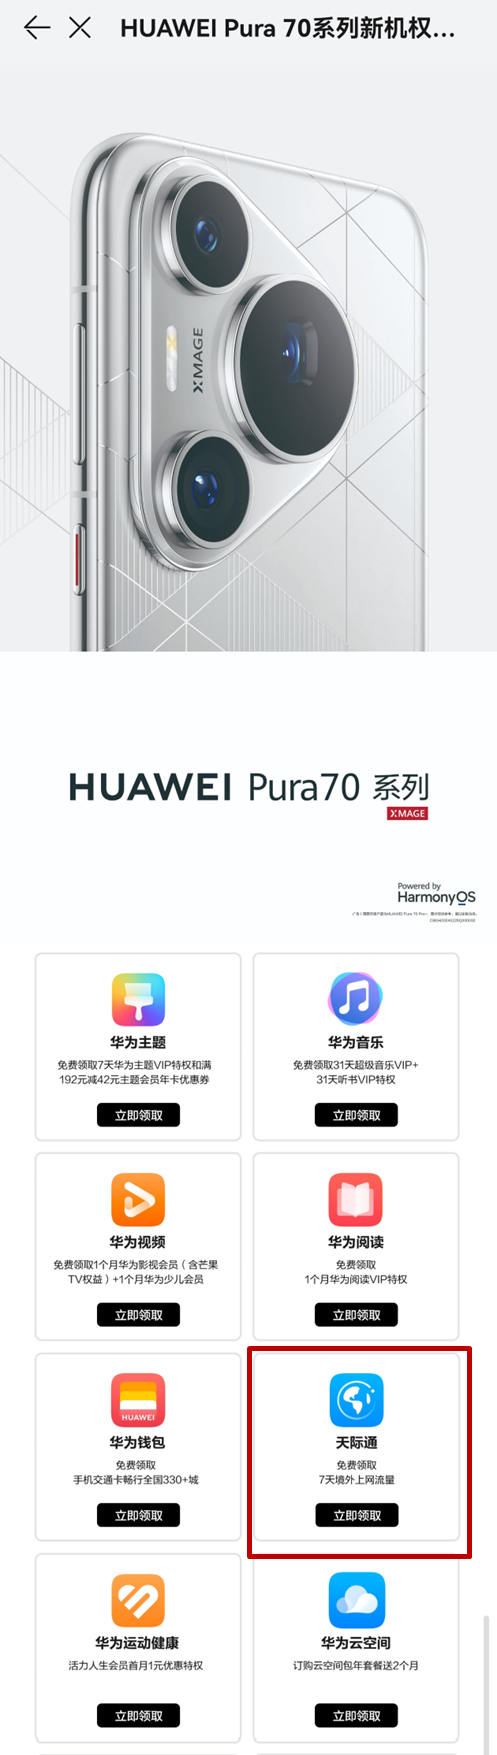  Blessed are Huawei users! Please check this outbound travel guide